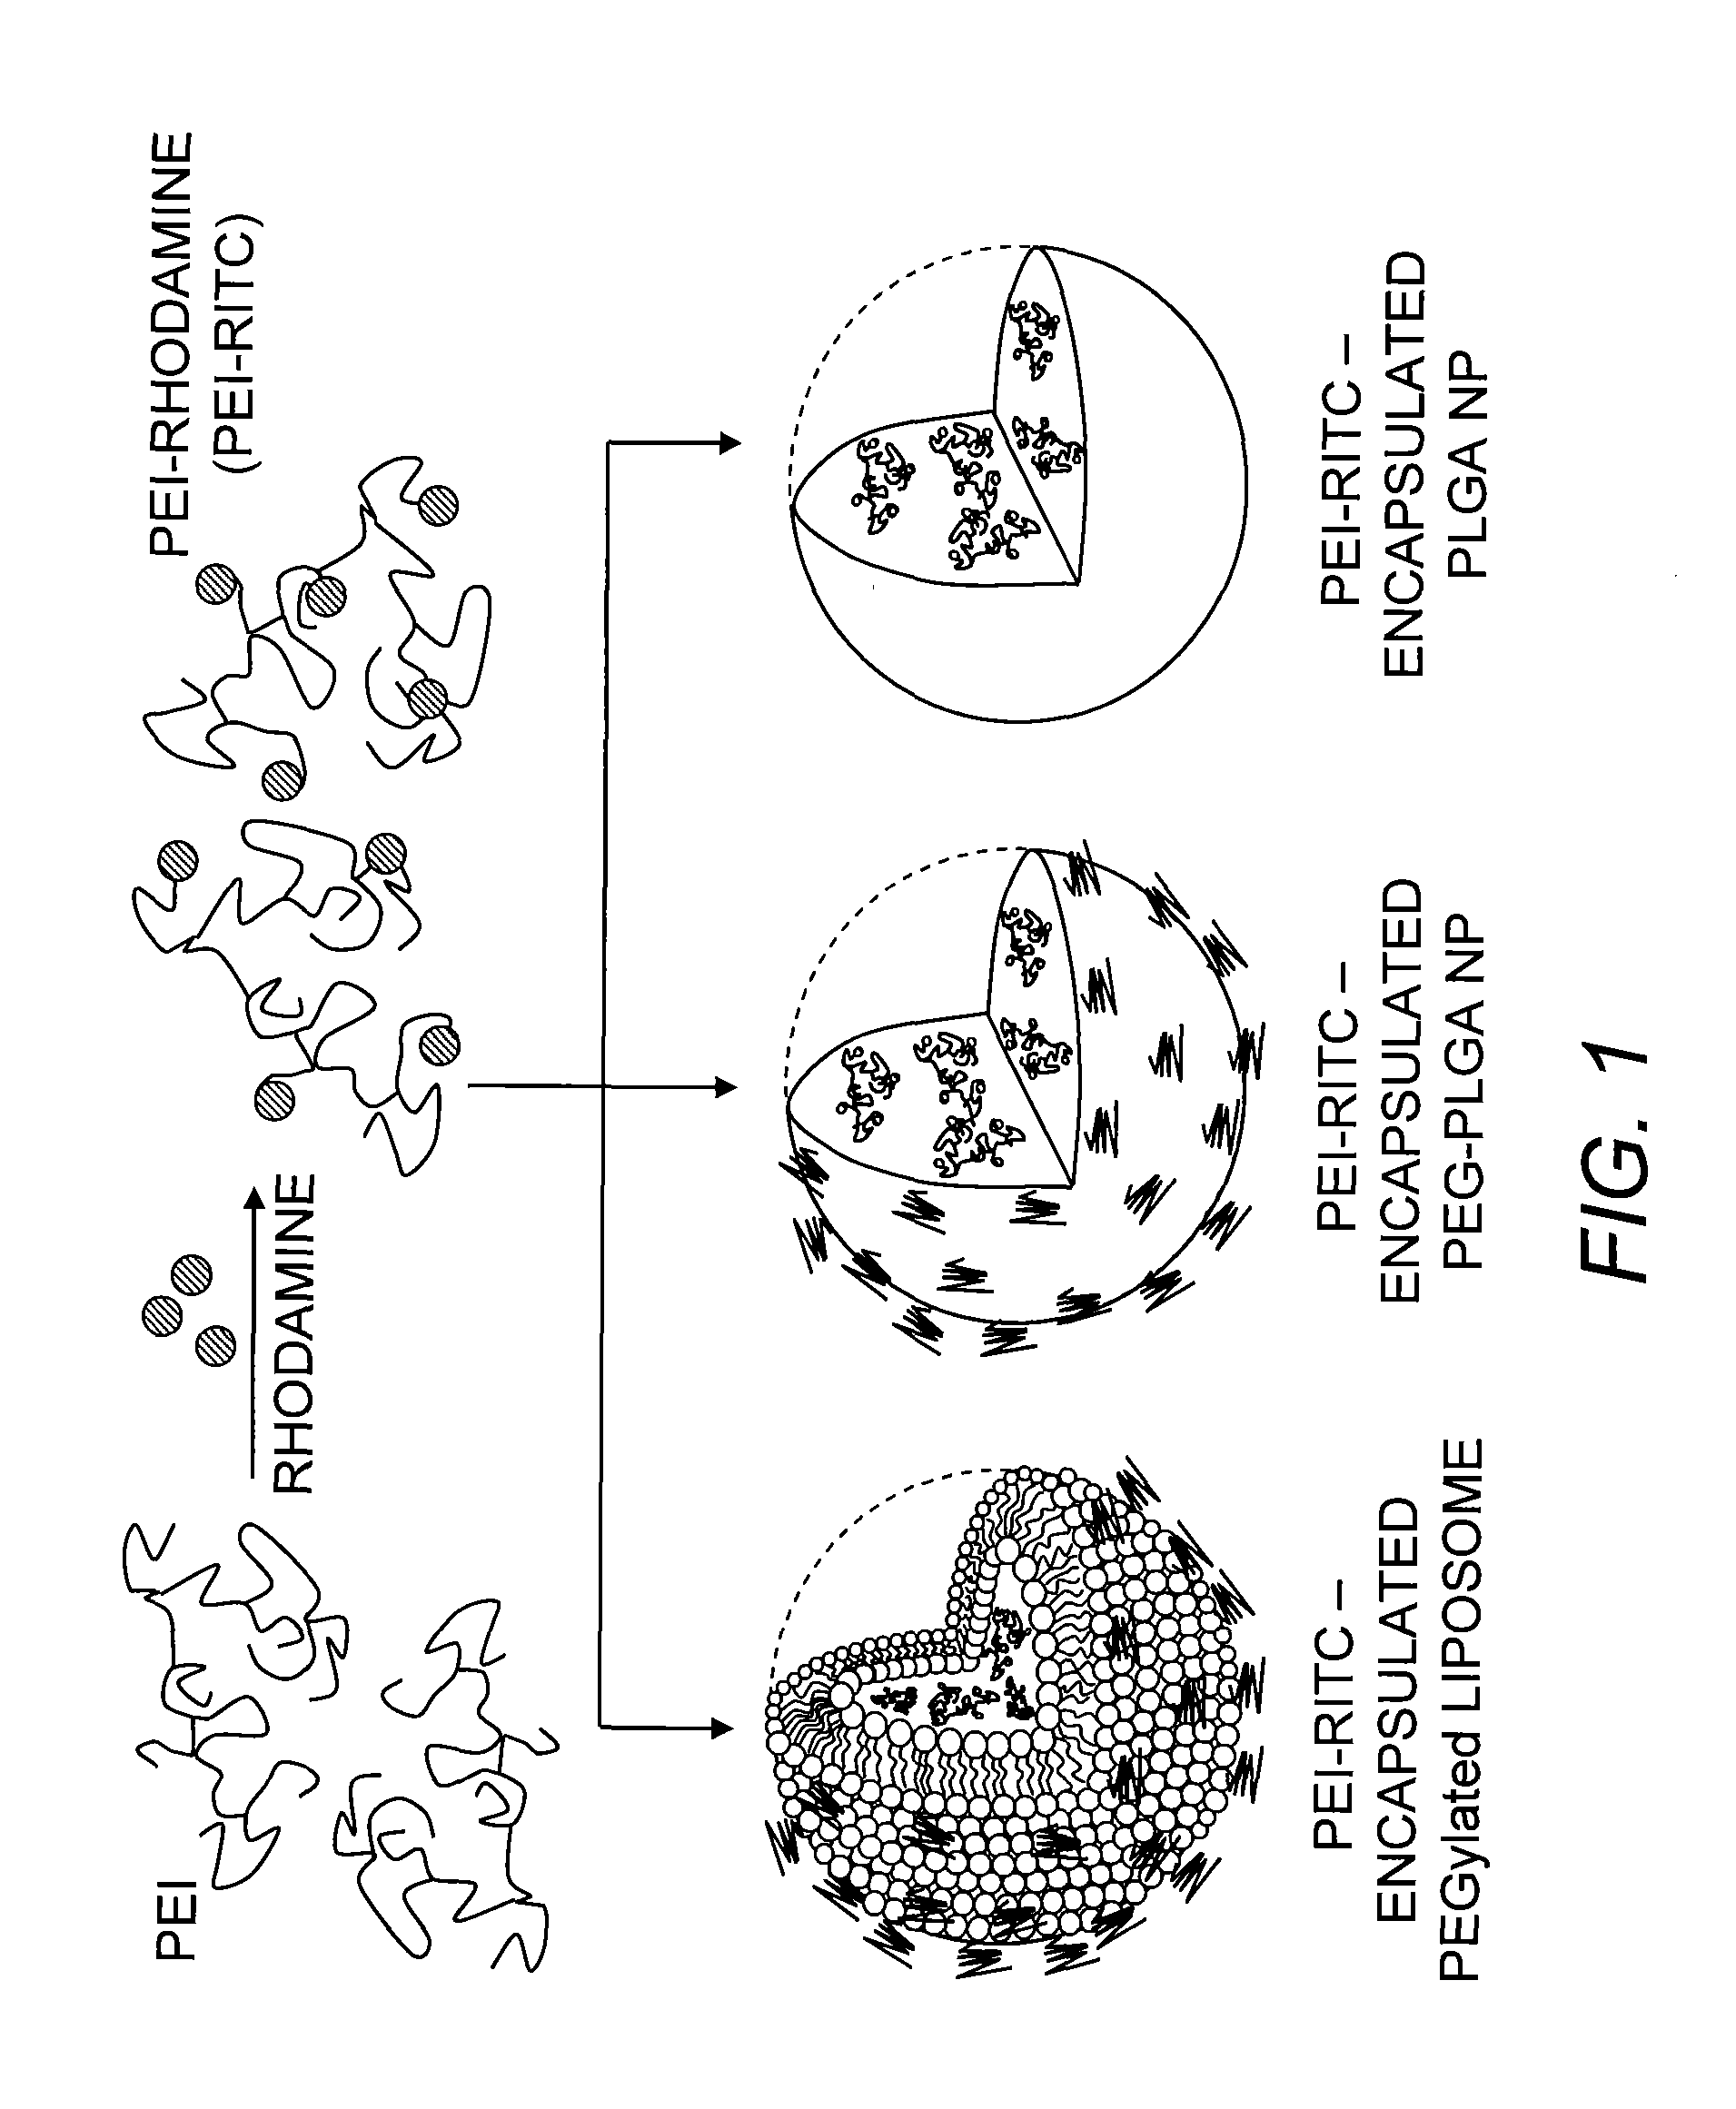 Nano-Hybrid Delivery System for Sequential Utilization of Passive and Active Targeting